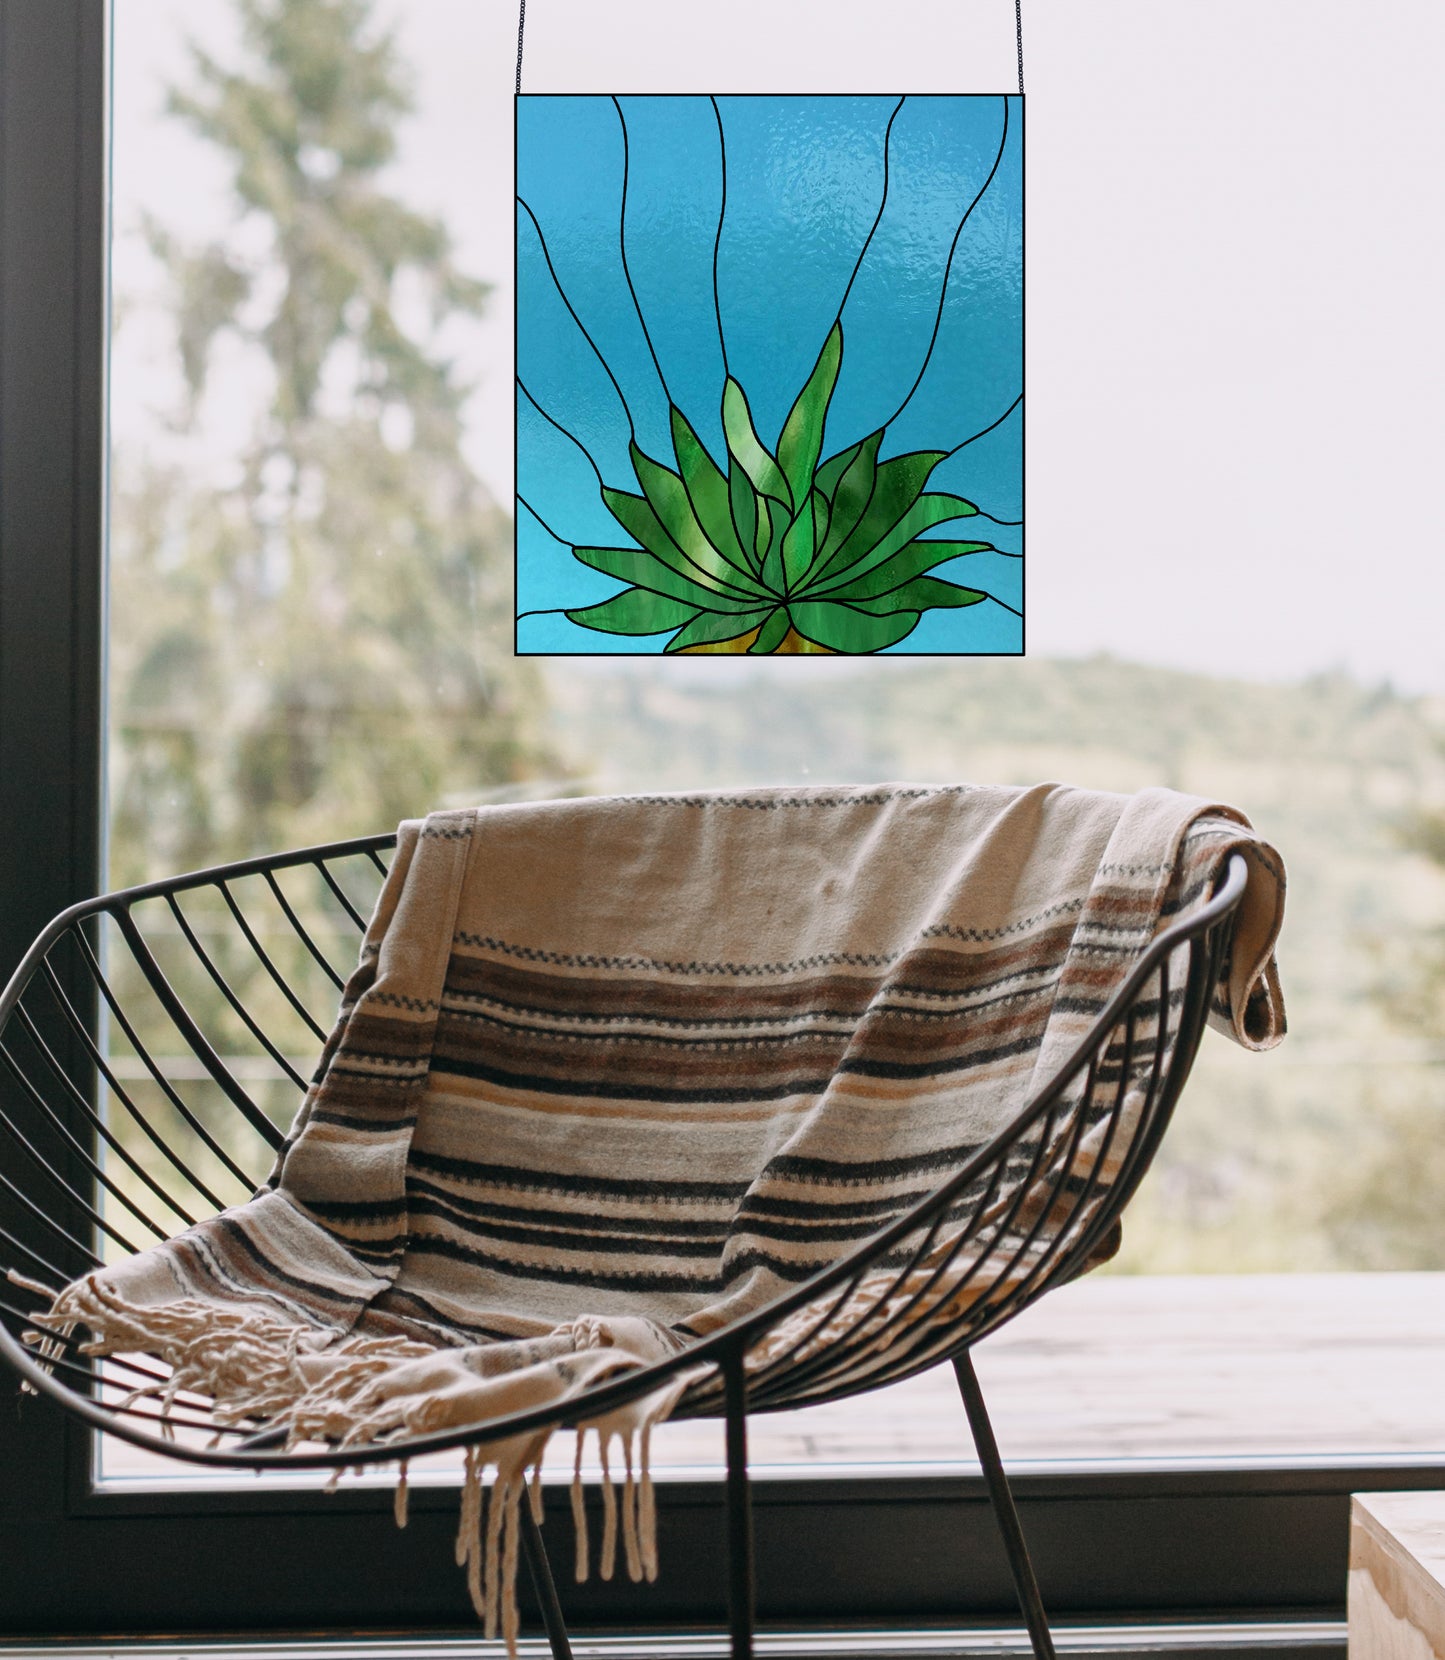 Gasteria Succulent Stained Glass Panel Pattern